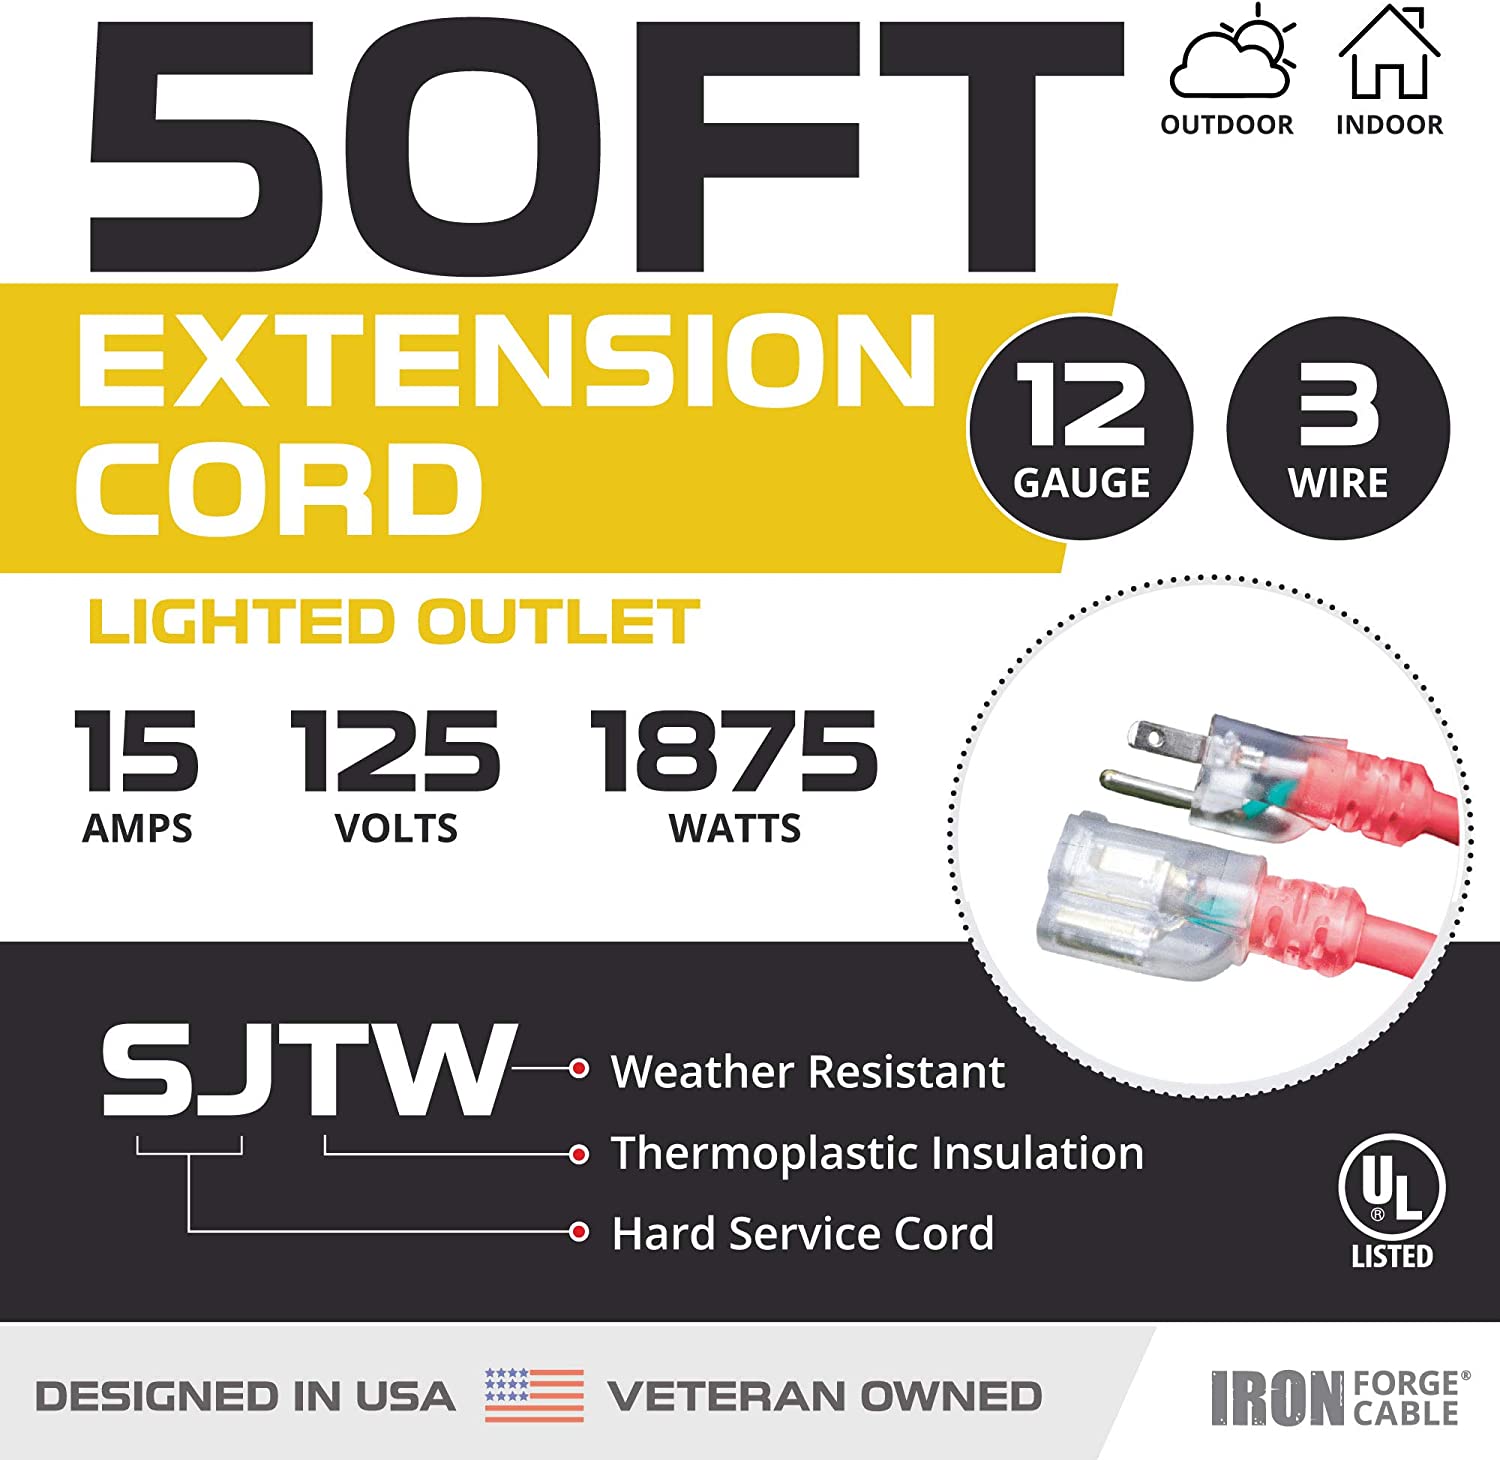 50 Ft Lighted Extension Cord - 12/3 SJTW Heavy Duty Red Outdoor Extens -  iron forge tools